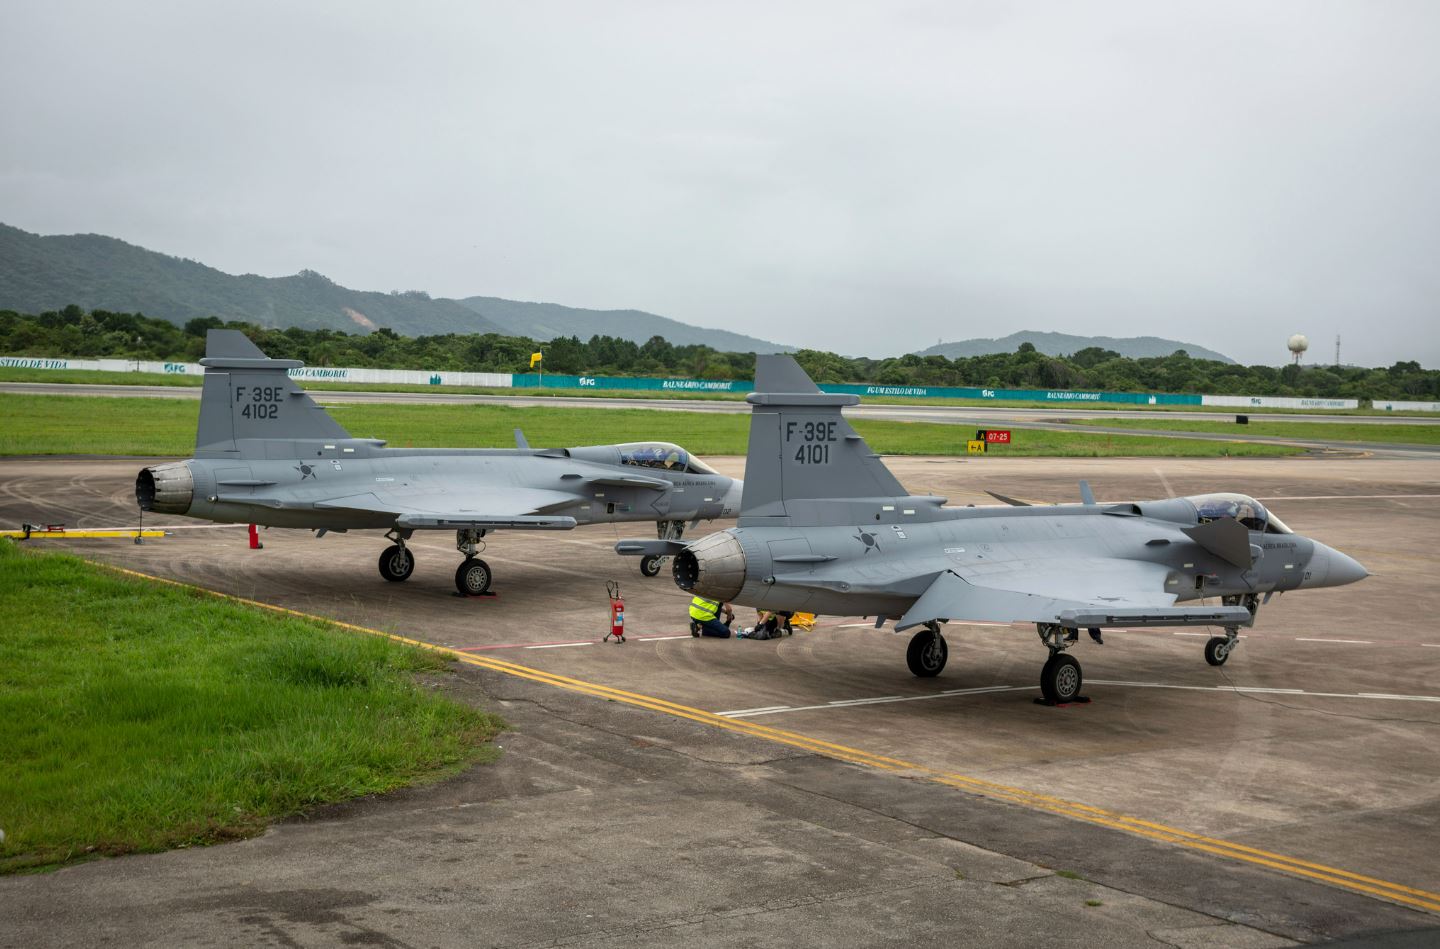 The F-39E Gripen fighters are expected to operate for the first time between November and December 2022.